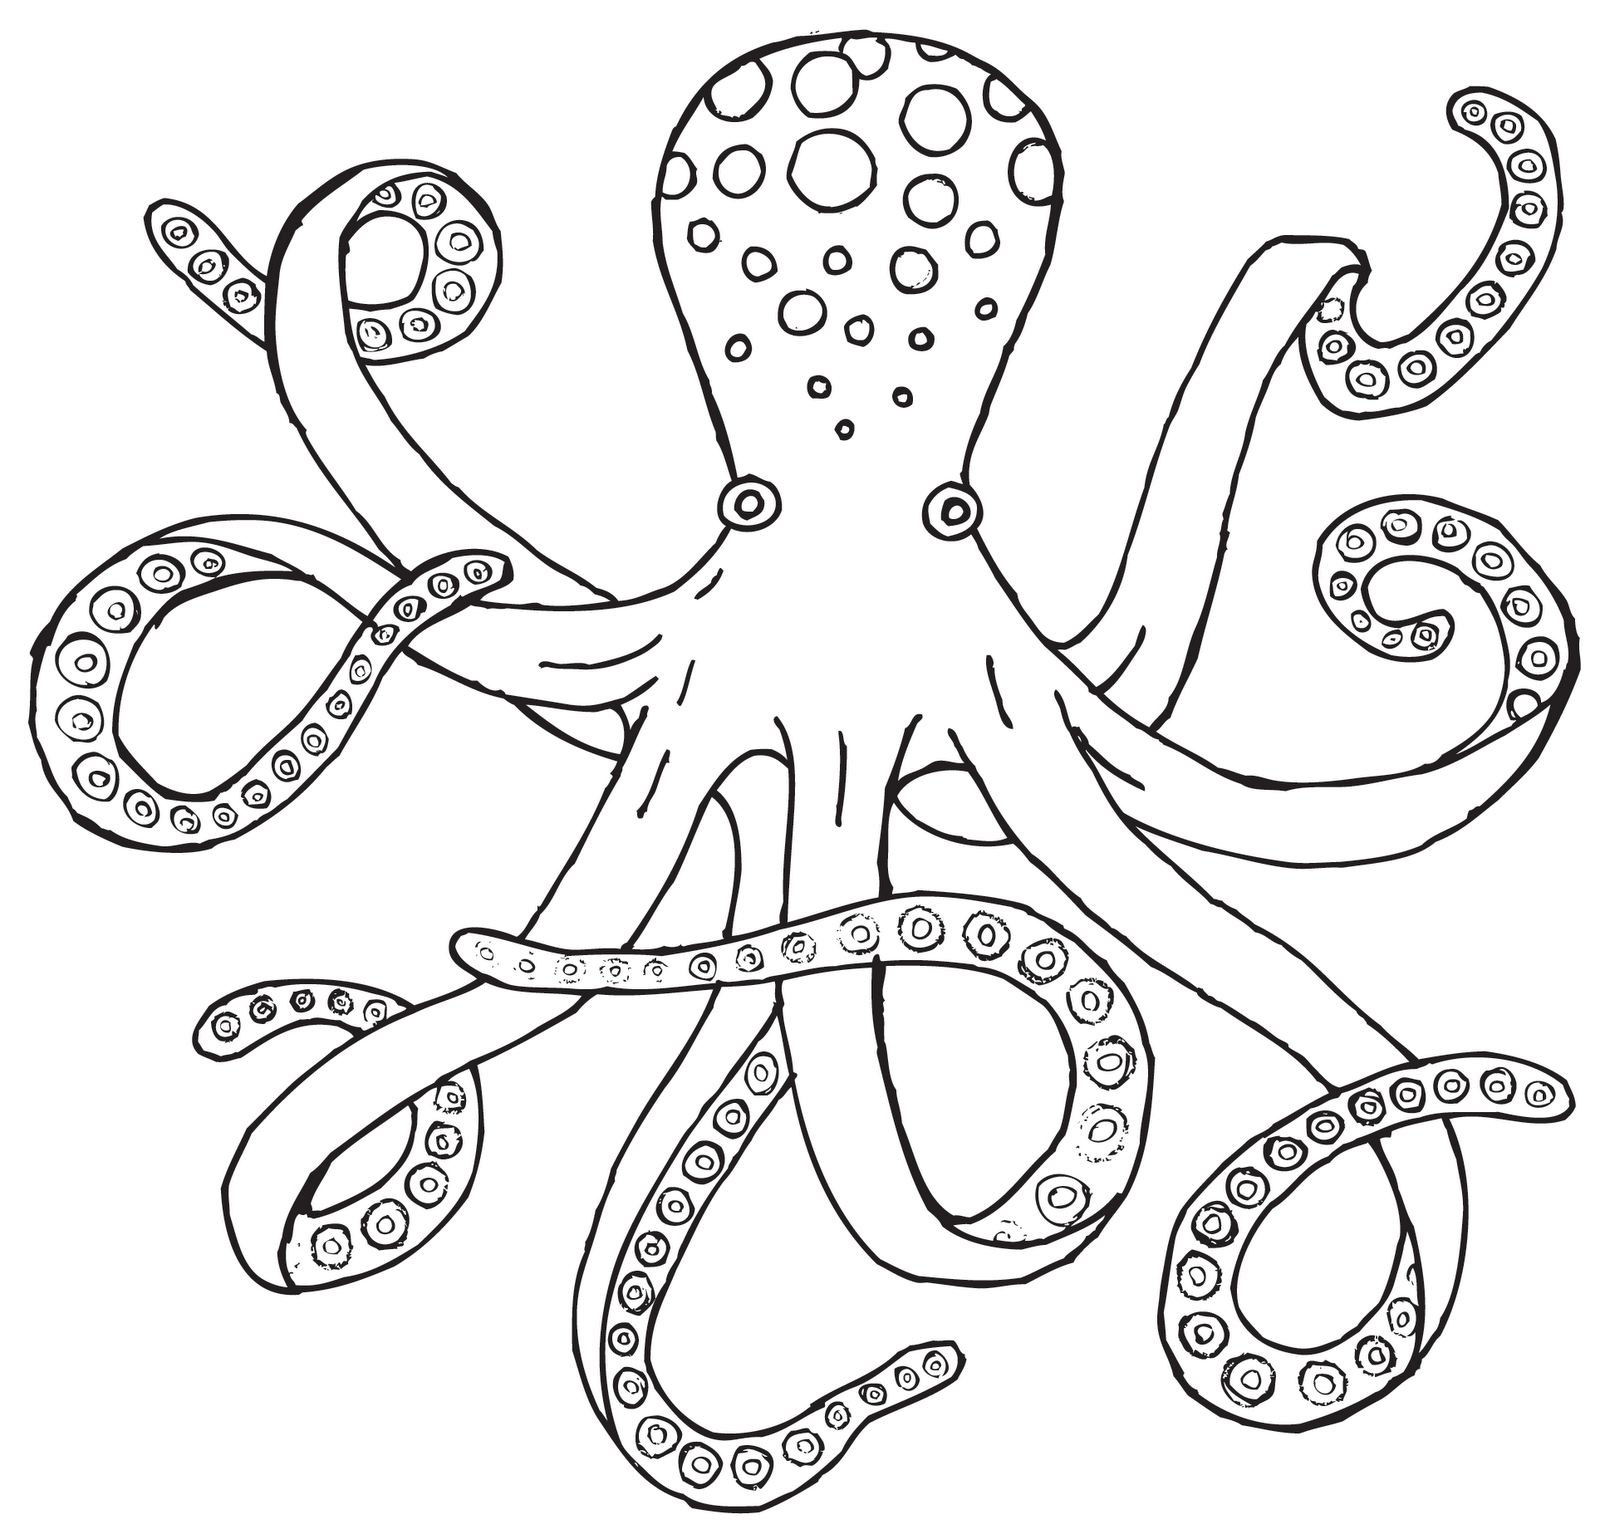 Free Octopus Clipart Black And White, Download Free Octopus Clipart ...